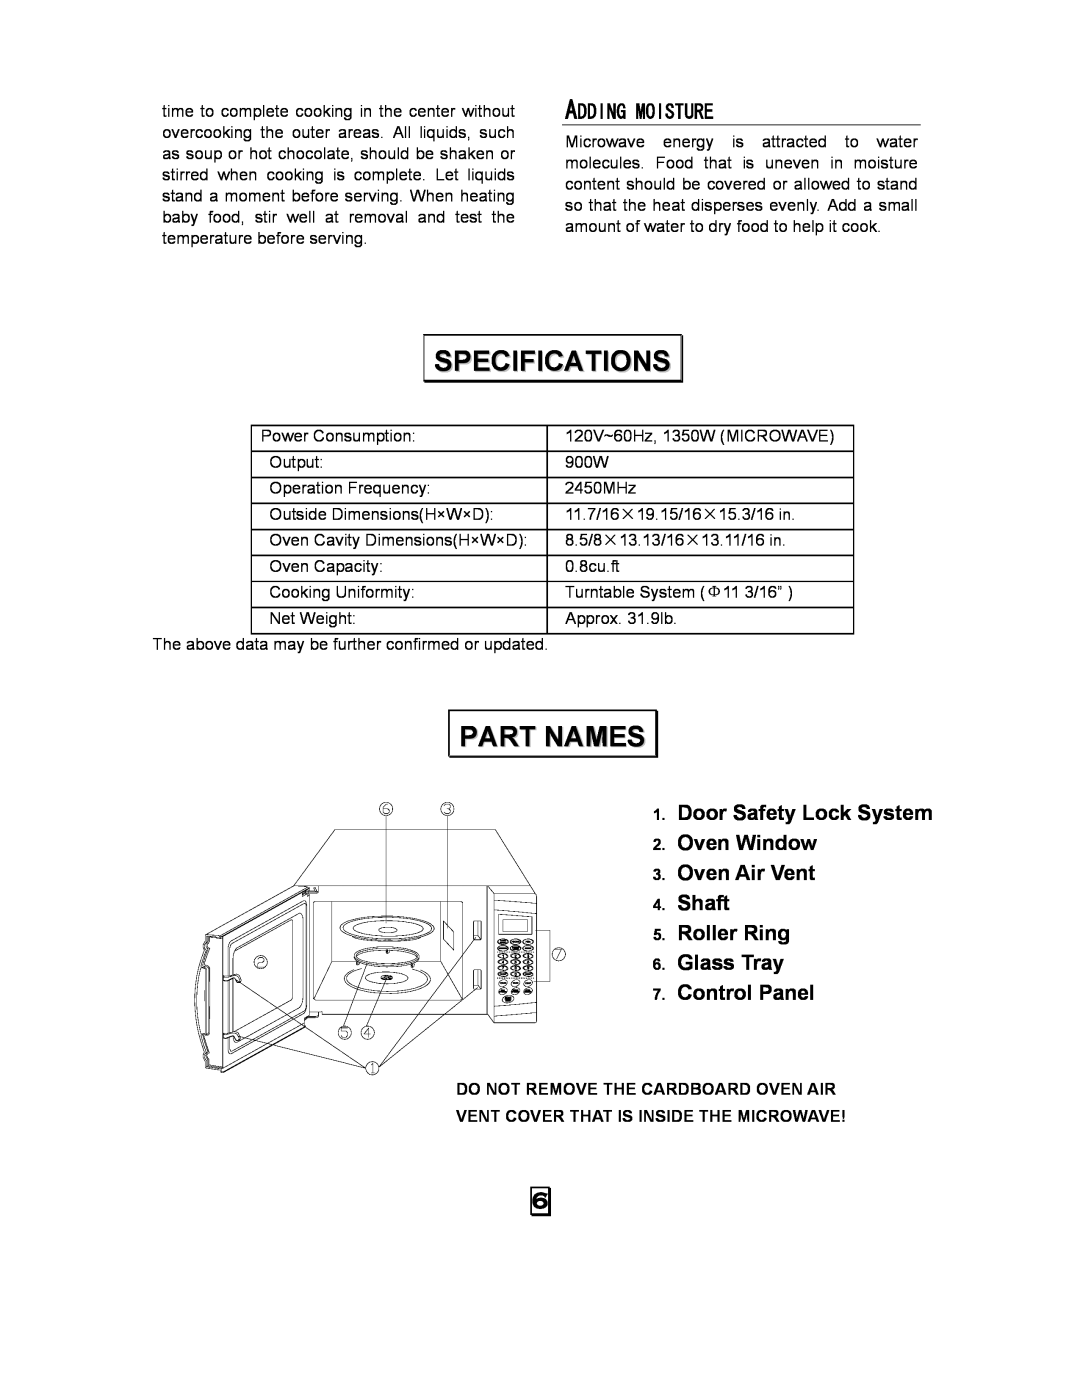 Kenmore 87090 owner manual Specifications, Part Names, Adding Moisture, Door Safety Lock System Oven Window Oven Air Vent 